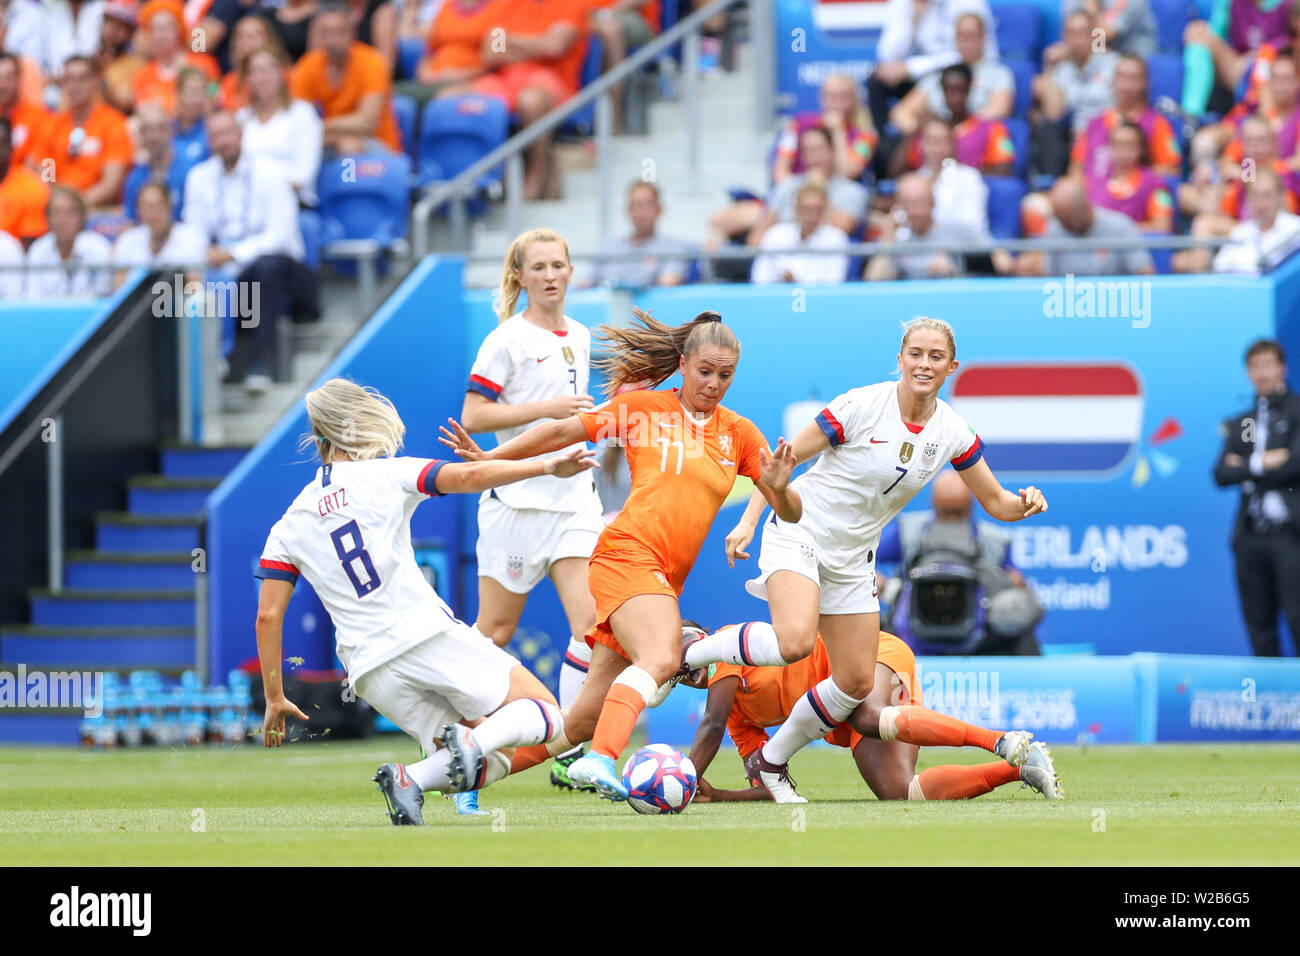 Lyon, France. 07th July, 2019. Martens of the Netherlands during match against the United States game valid for the Final of the Women 's Soccer World Cup in Lyon in France this Sunday, 07. Credit: Brazil Photo Press/Alamy Live News Stock Photo